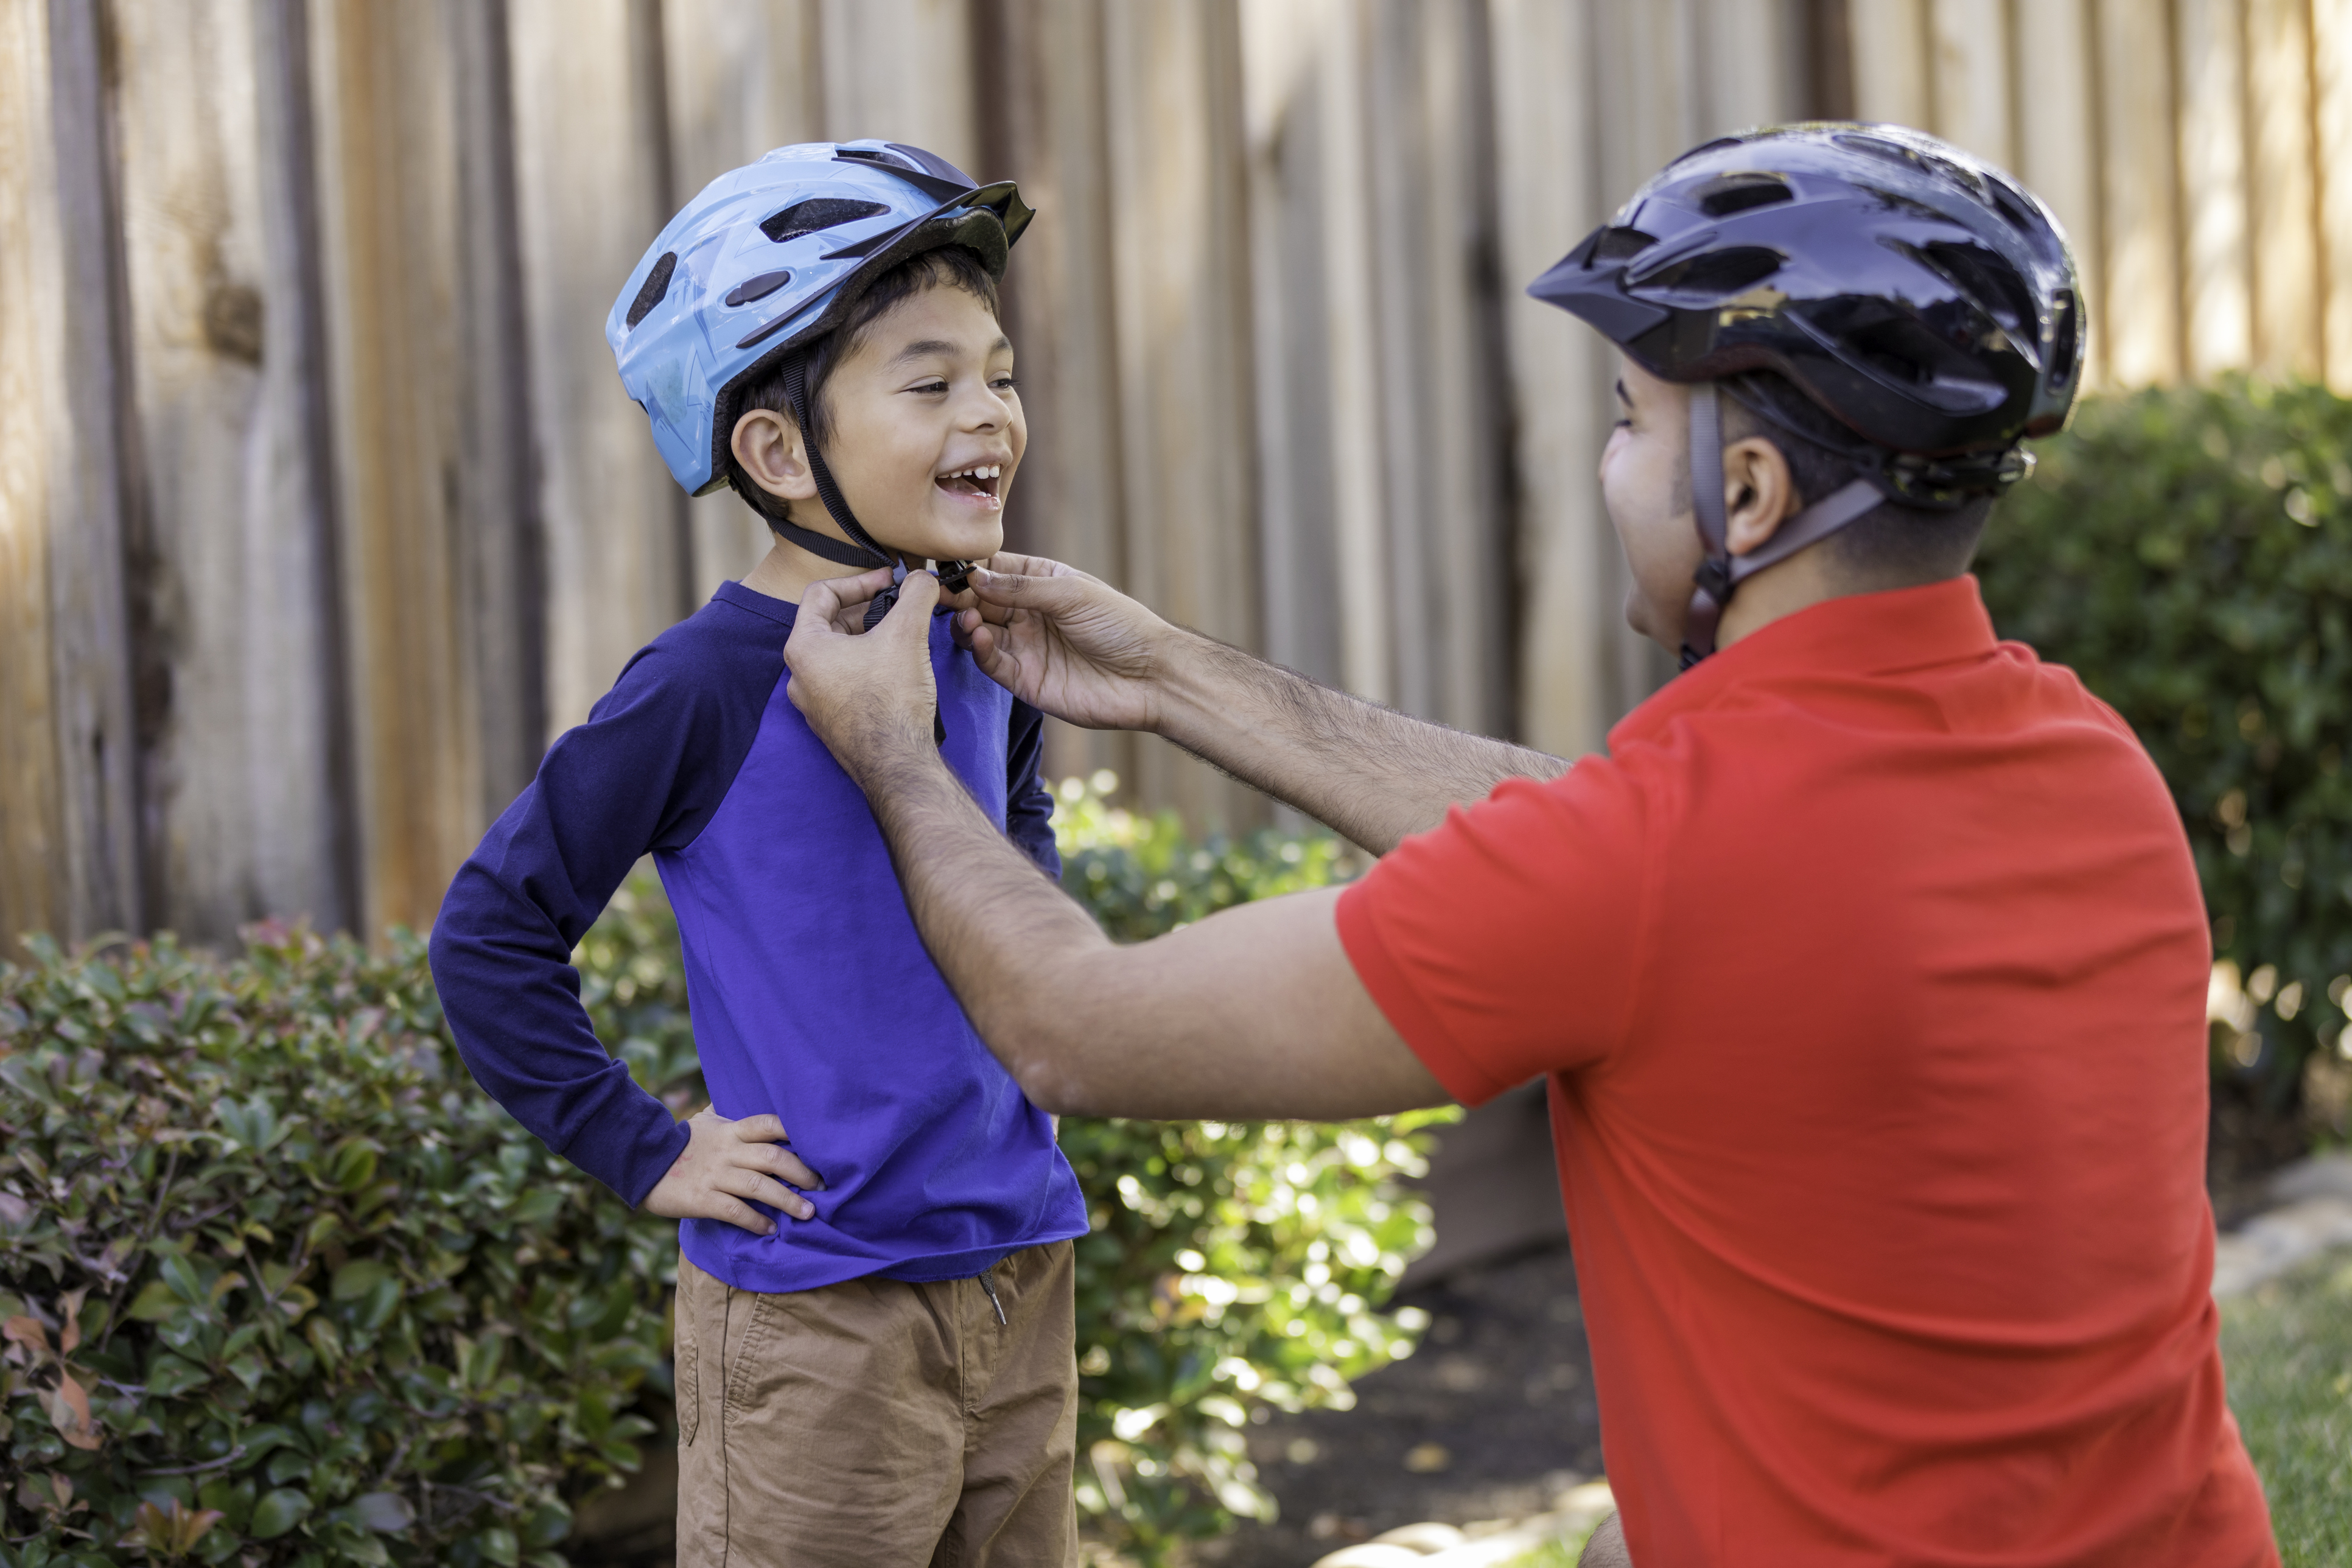 Father helping his son put on his bike helmet